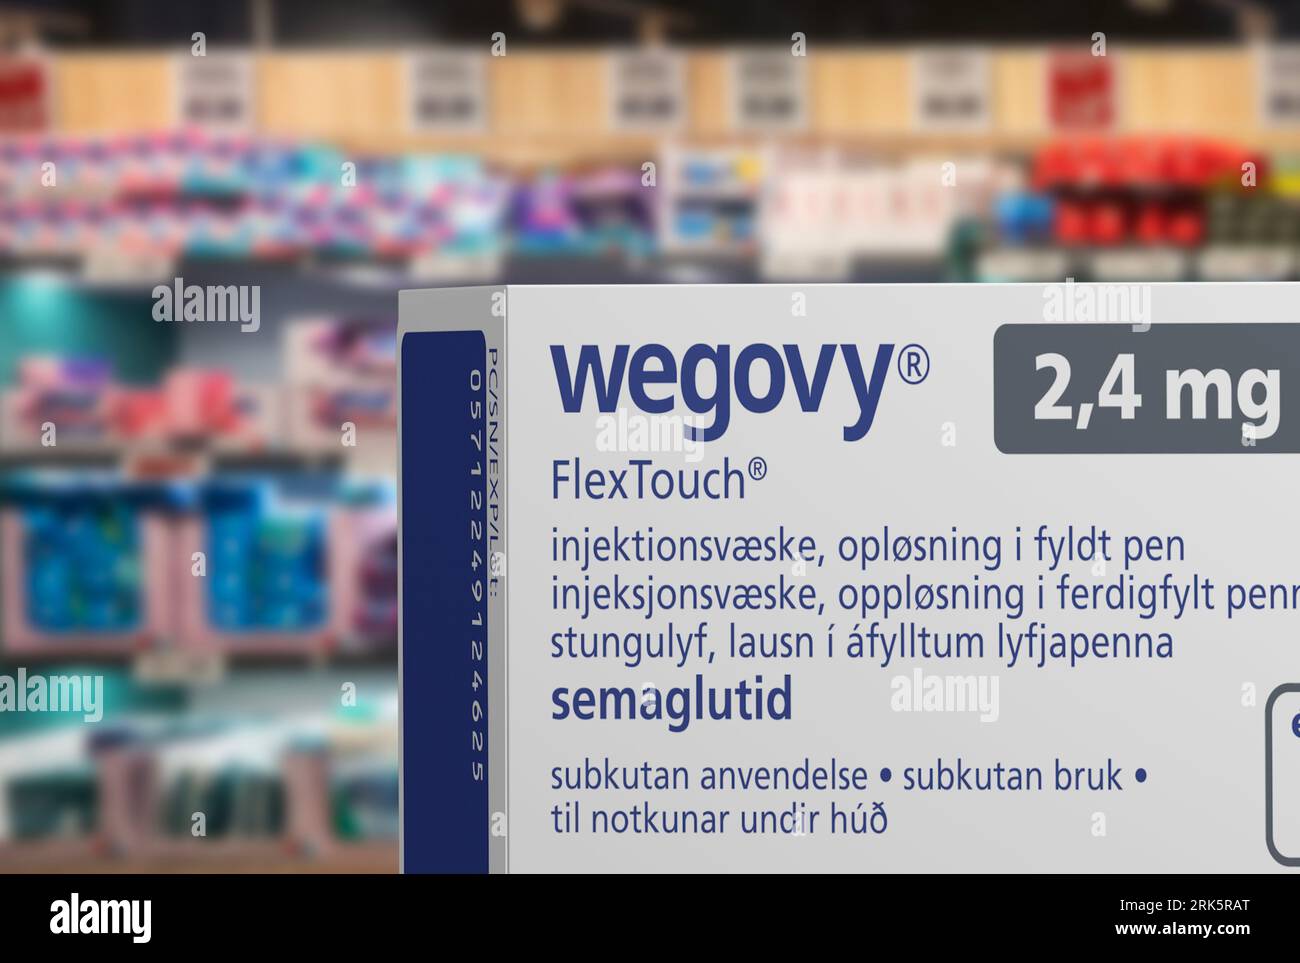 Packaging box of Wegovy (semaglutide) injectable prescription medication, weight-loss drug from Novo Nordisk A/S.  Blurred shop shelves in background. Stock Photo